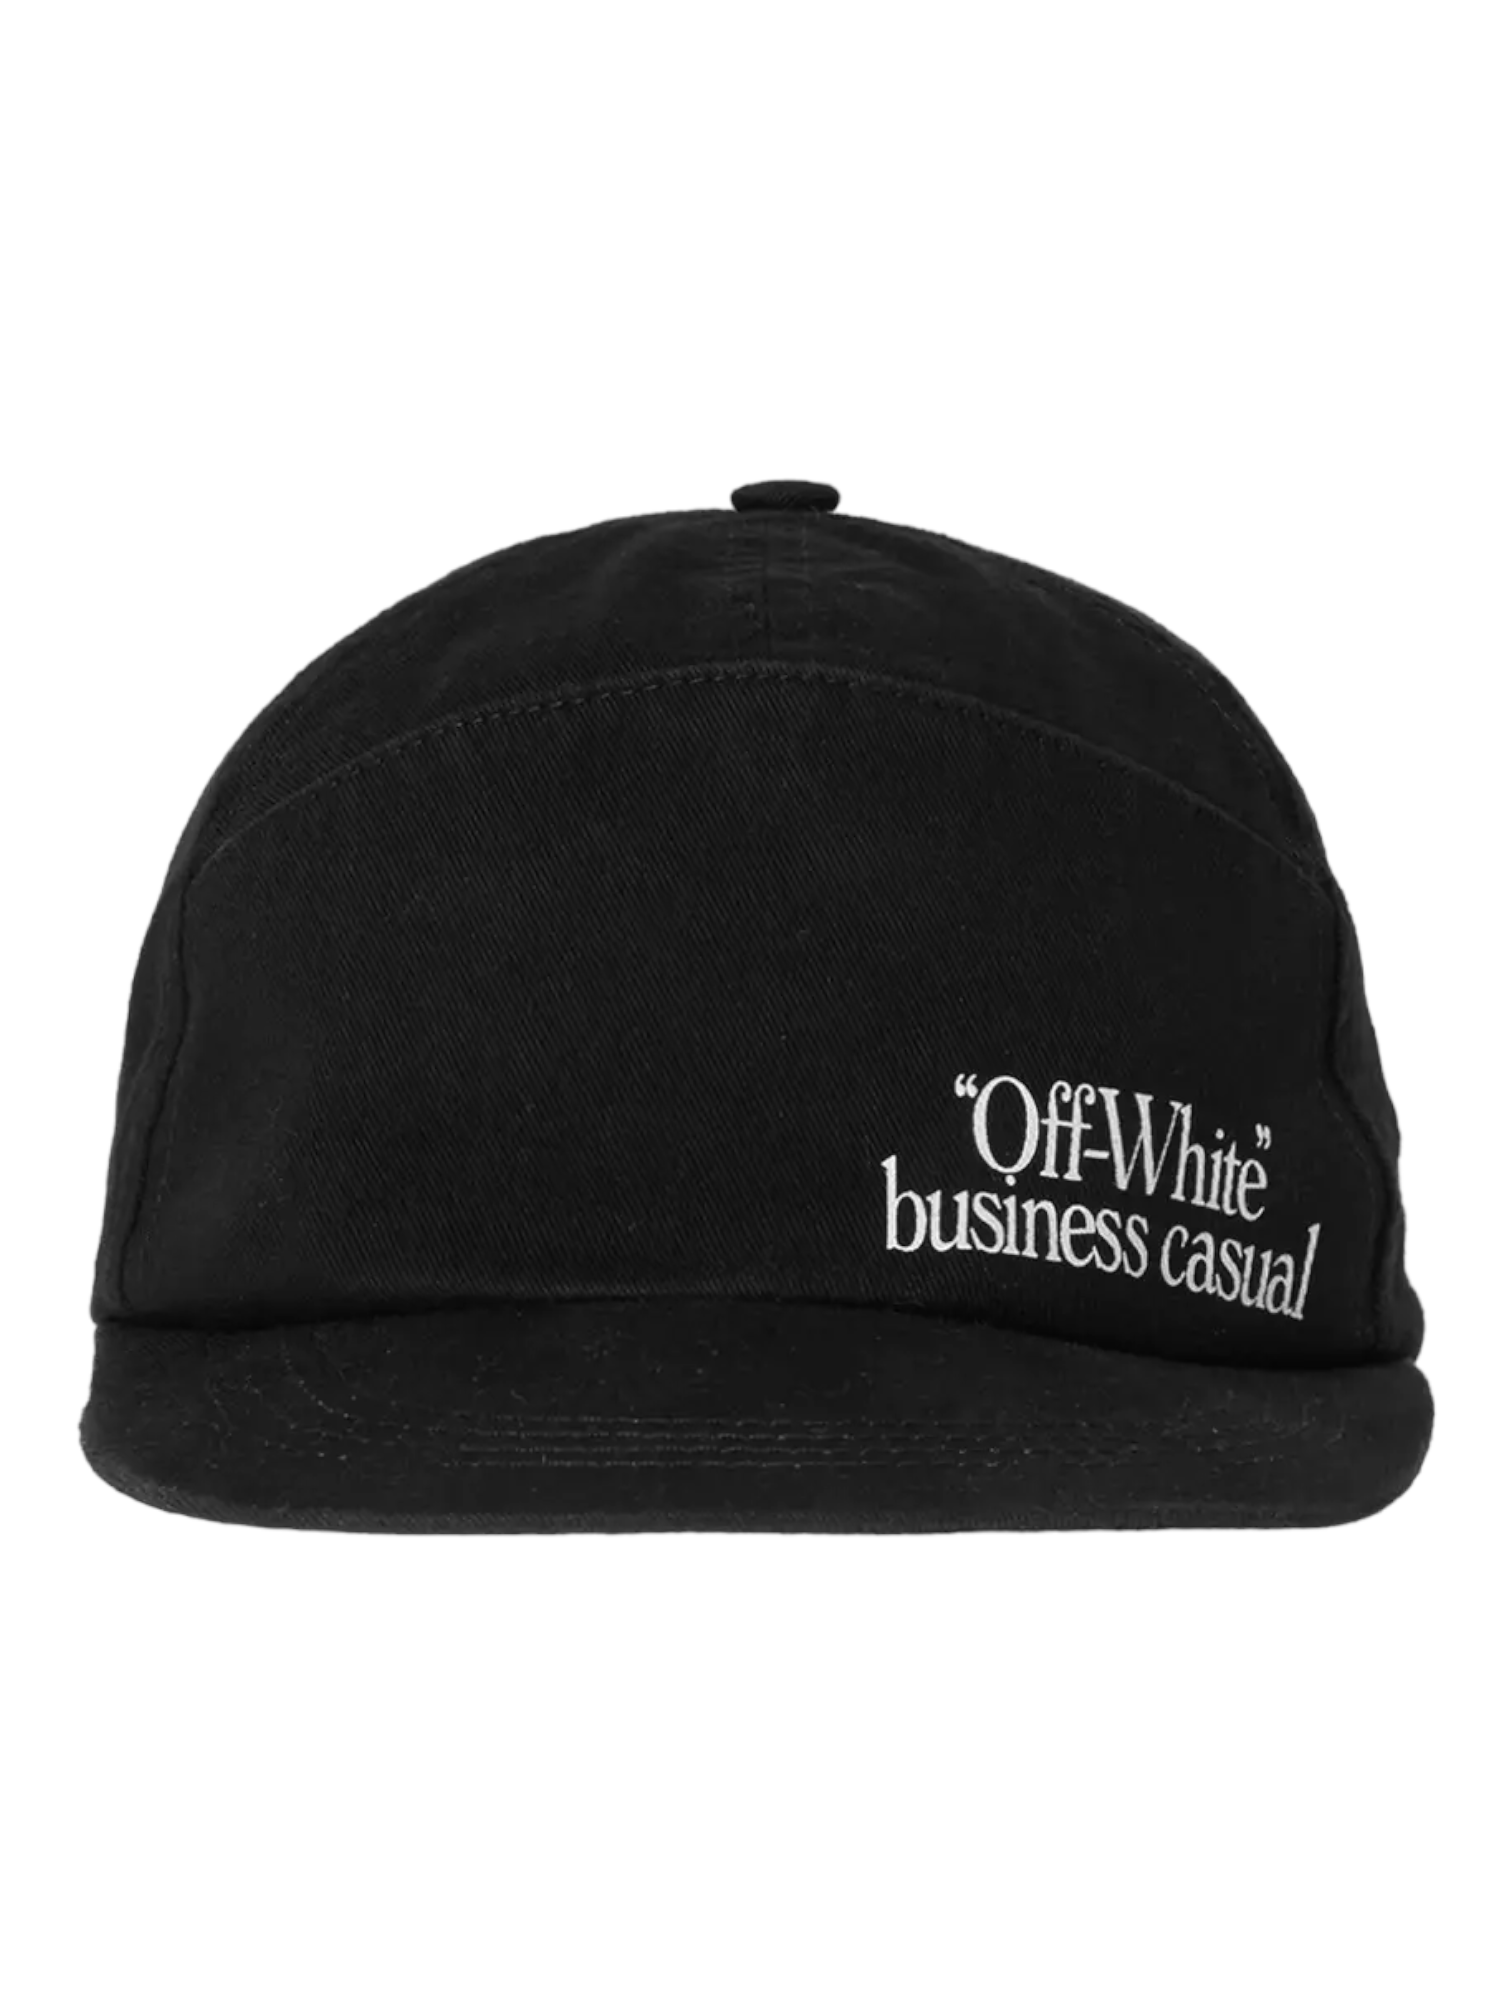 Off-White 5 Panel Business Casual Cap — Genuine Design Luxury Consignment for Men. New & Pre-Owned Clothing, Shoes, & Accessories. Calgary, Canada